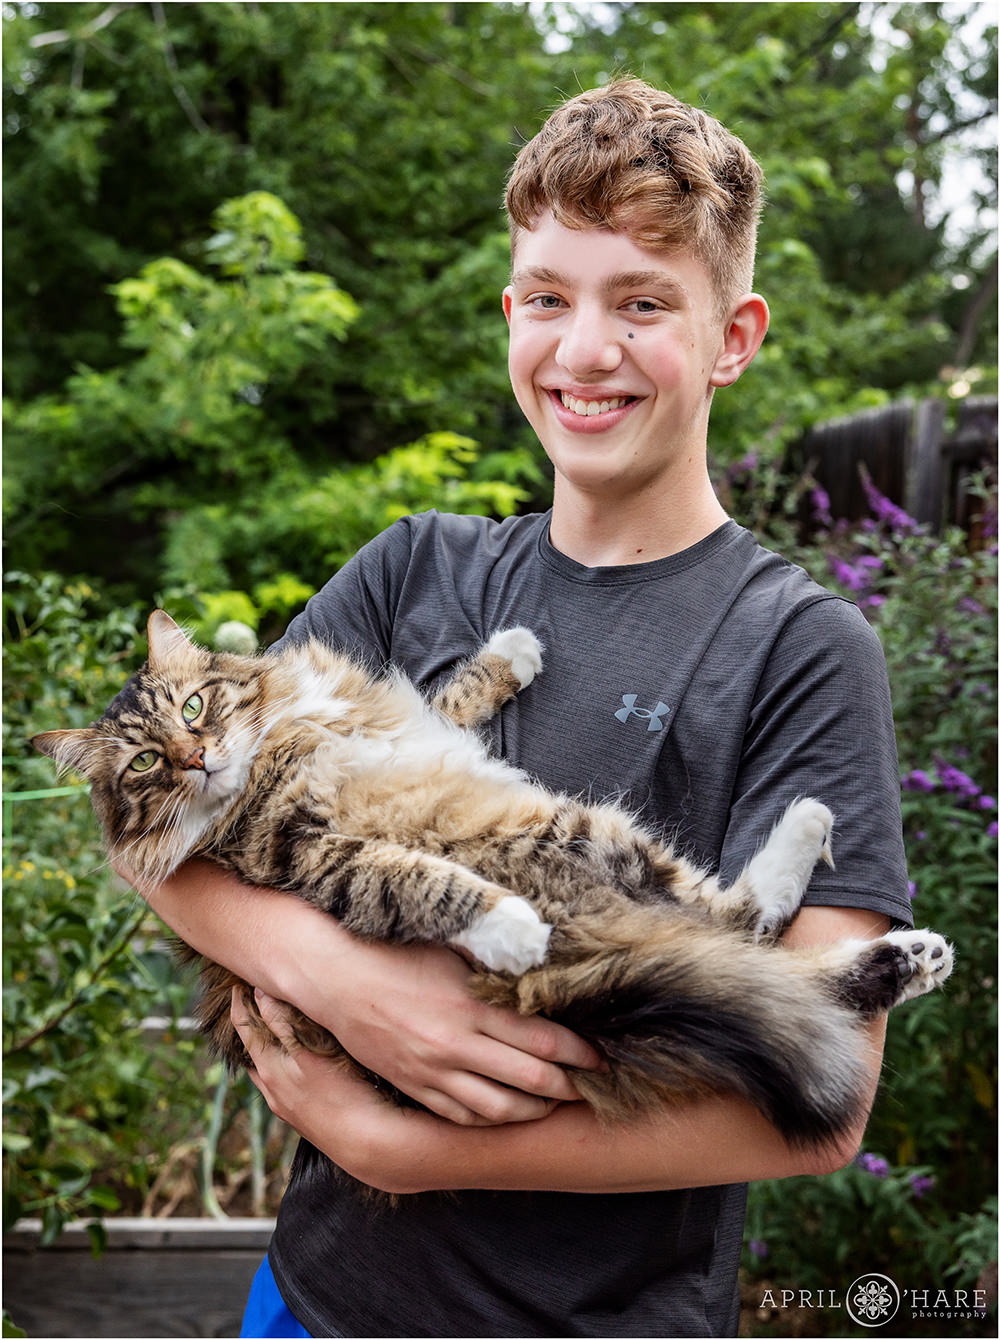 Bar mitzvah boy holds his large fluffy cat at his backyard bar mitzvah in Colorado